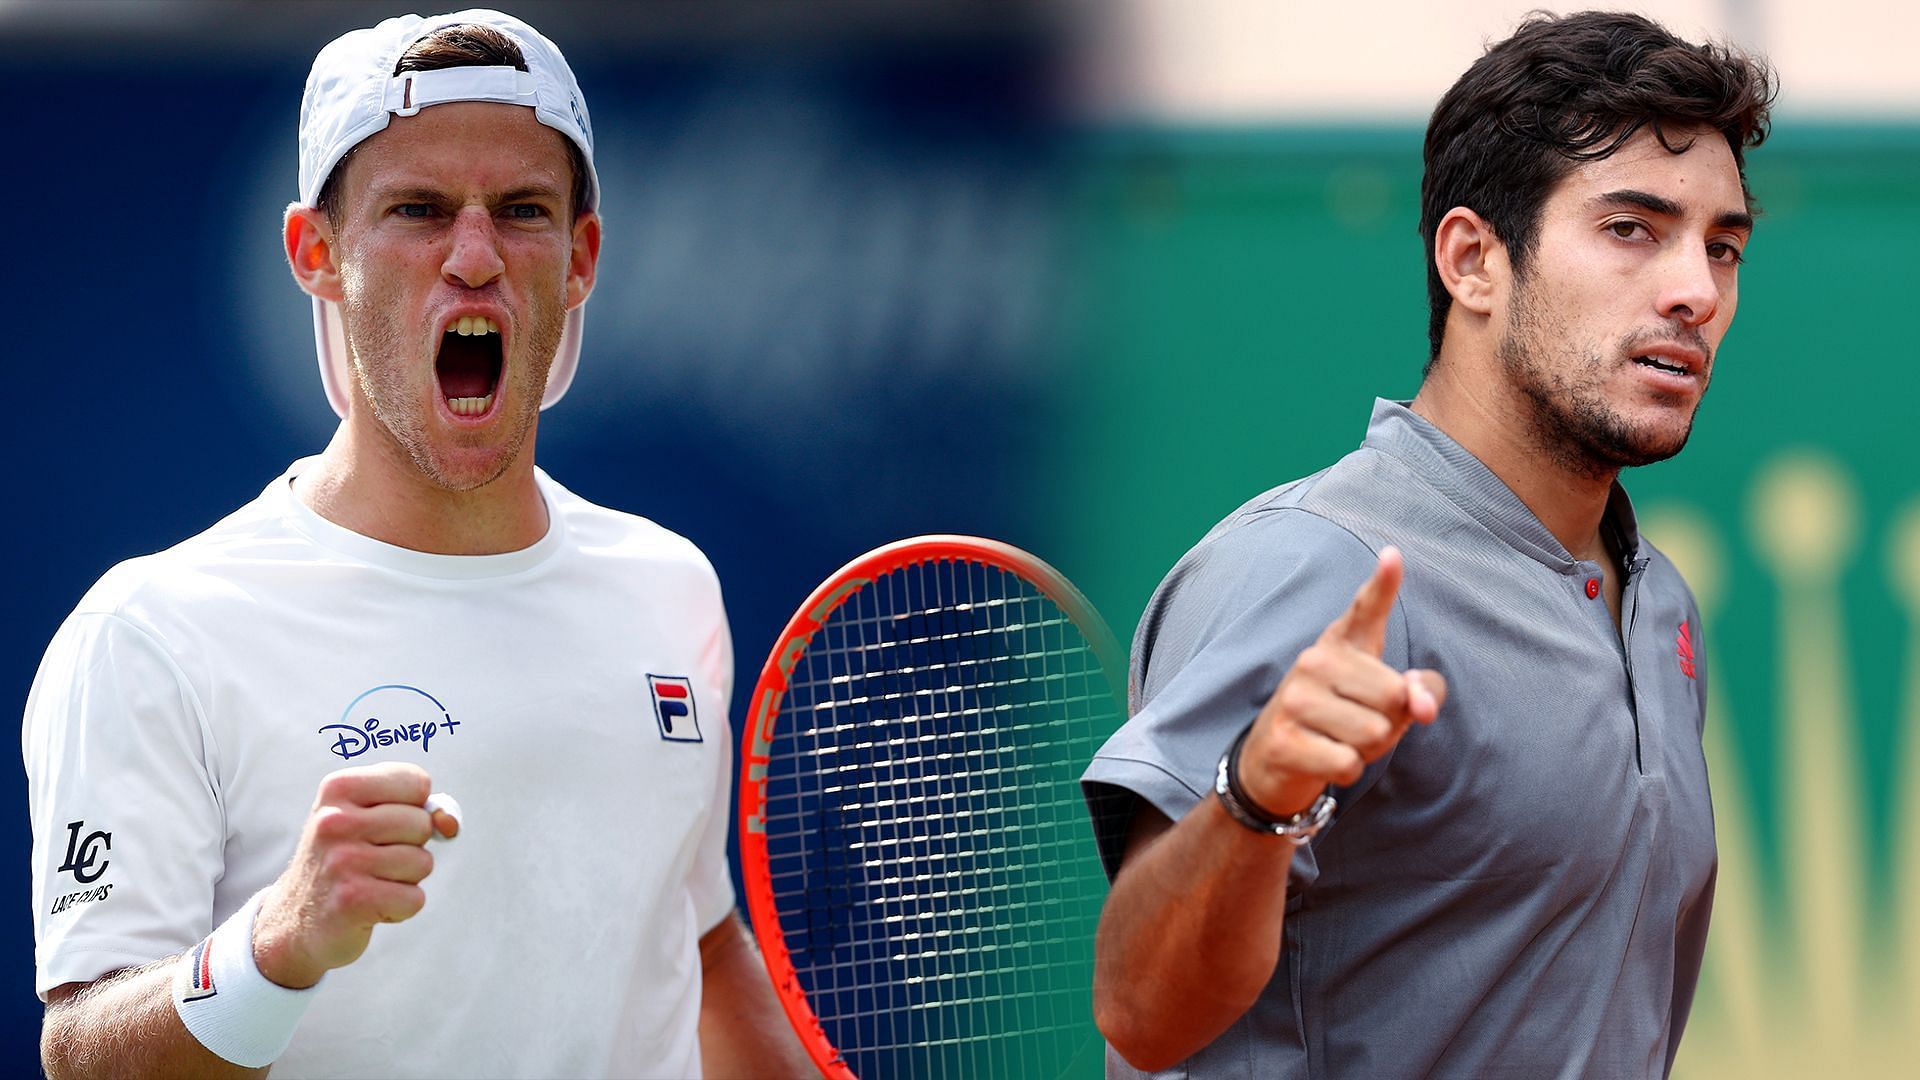 Diego Schwartzman (L) and Cristian Garin are in action on Thursday.